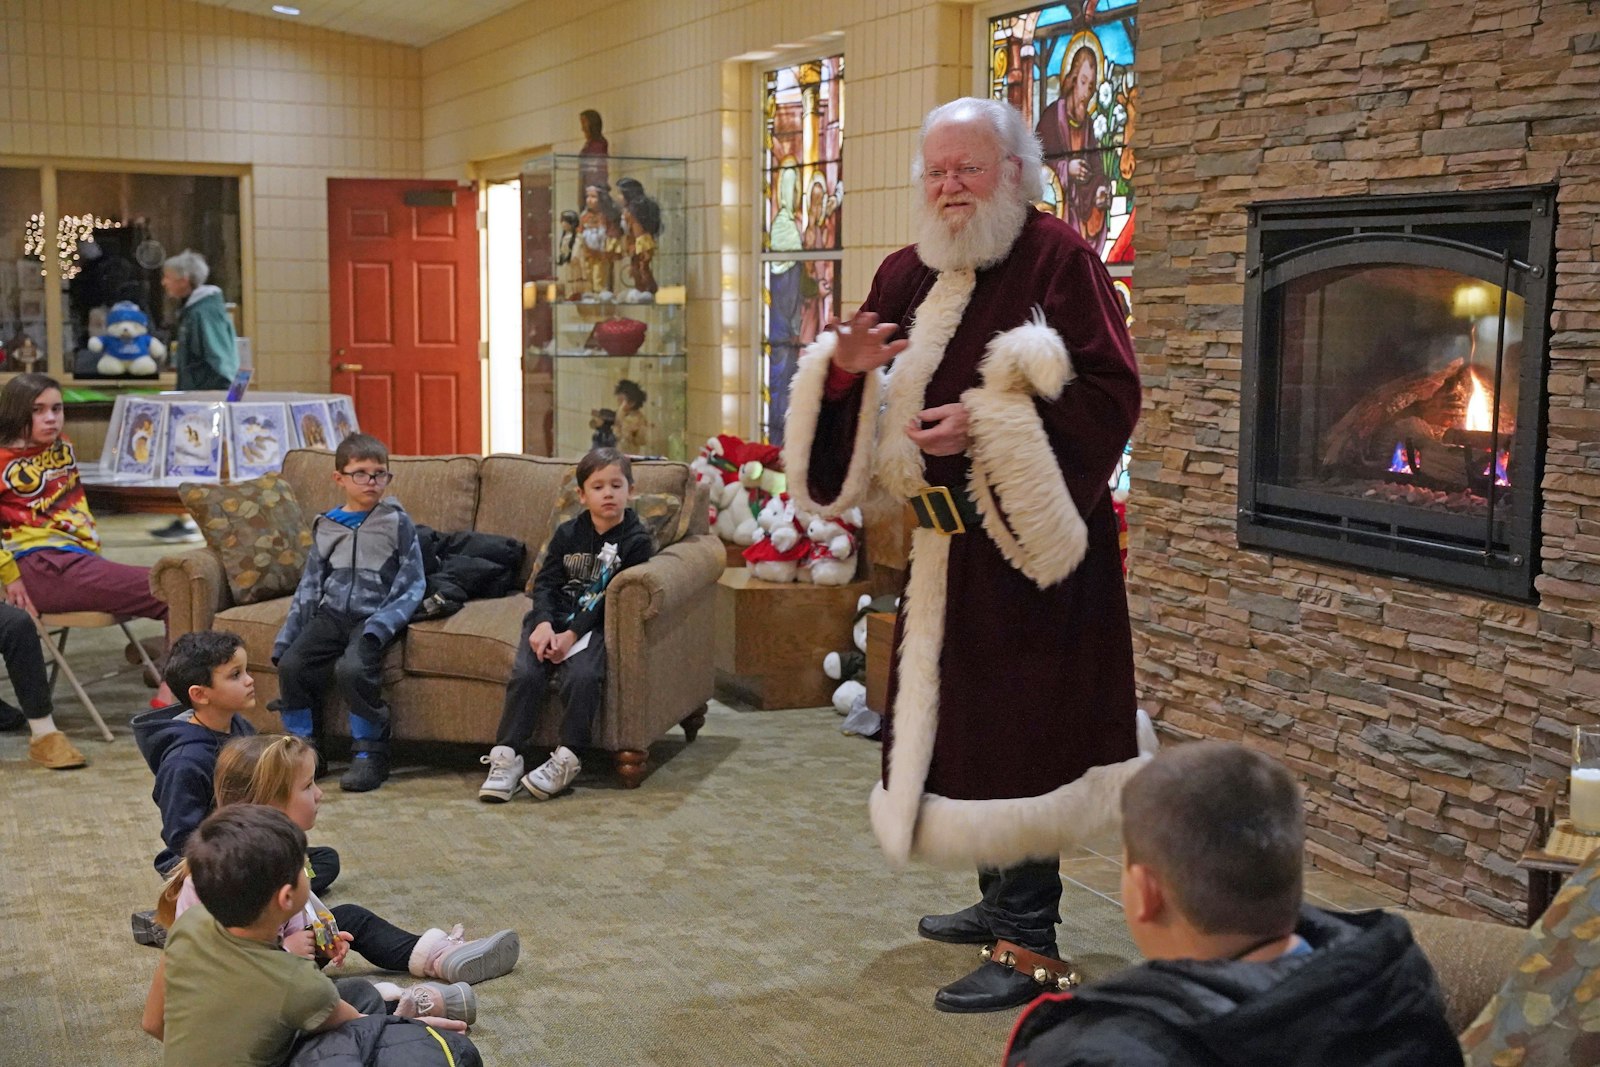 Santa Claus encouraged the youth gathered at St. Kateri Tekakwitha Parish to go out of their way to be kind to one another, help out their parents when they can and to keep the true meaning of Christmas alive all year.